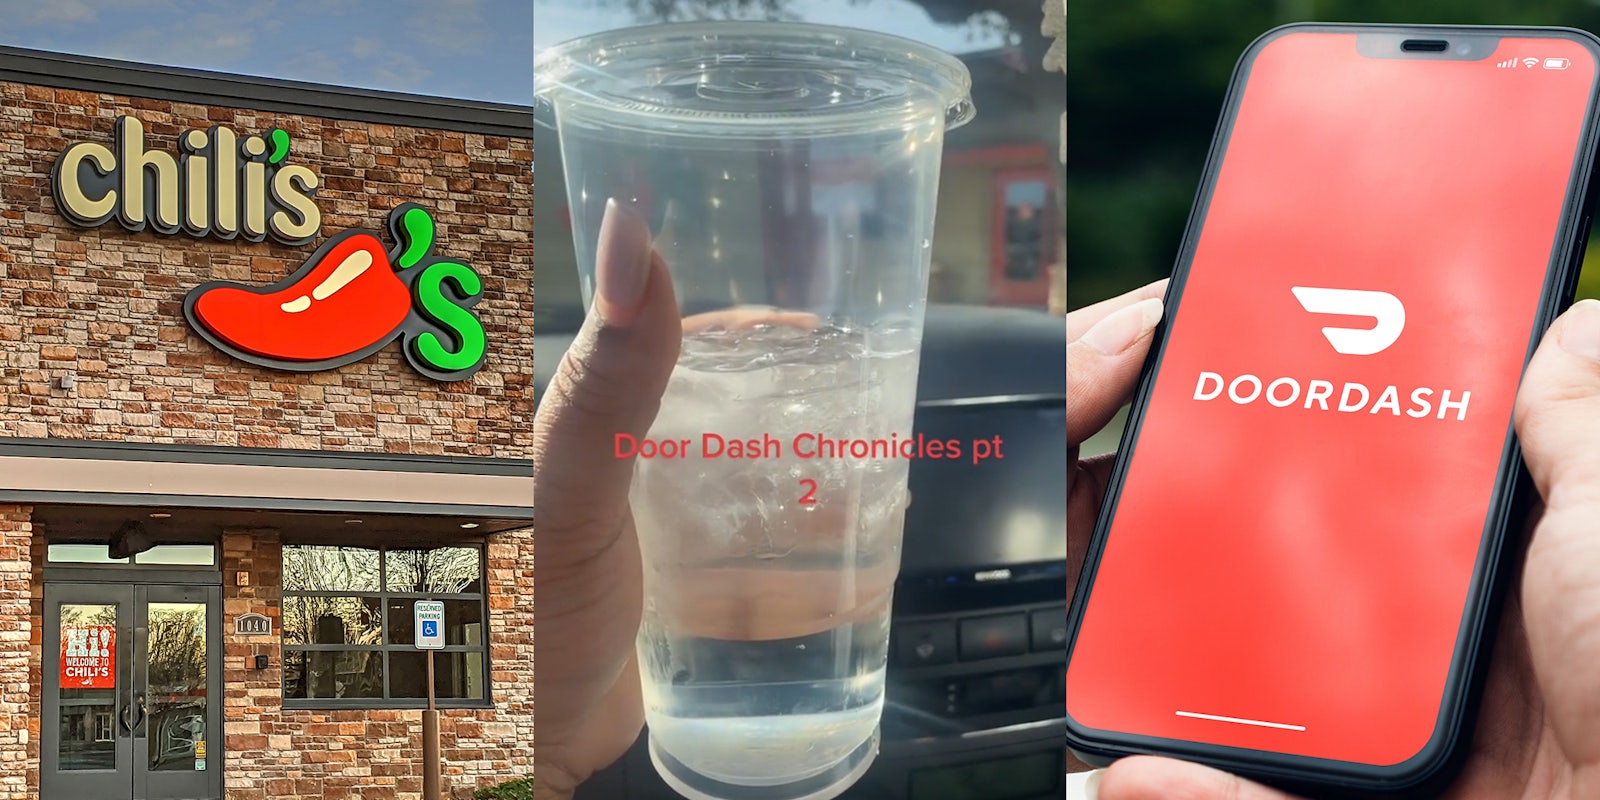 chili's restaurant (l) woman holding cup of water with caption 'Door Dash Chronicles pt 2' (c) hands holding phone with Doordash app (r)